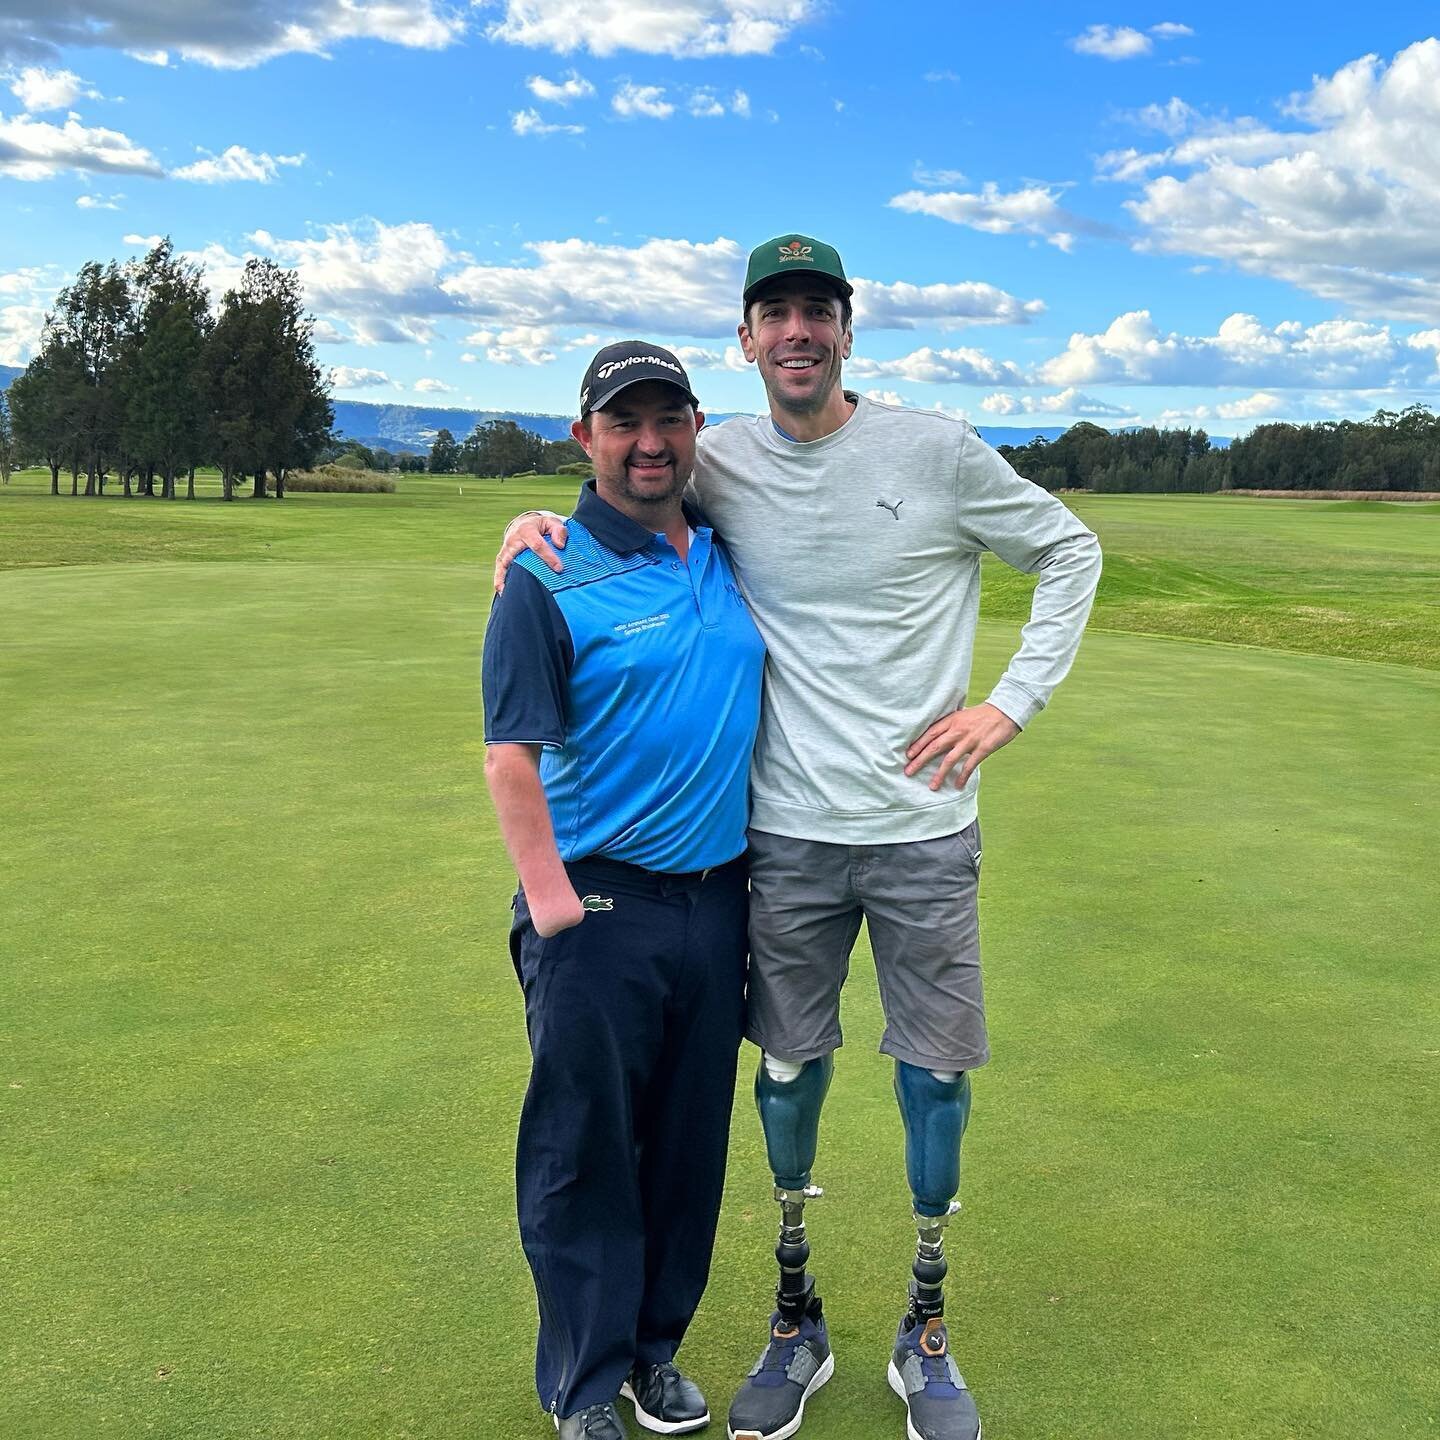 A huge congratulations is in order for our favourite Legless guy, Mike! He took out the NSW Amputee Golf Championship alongside Steve Prior. These joint winners are looking pretty chuffed, rightfully so. Congratulations fellas!

#AmputeeGolf

ID: Two